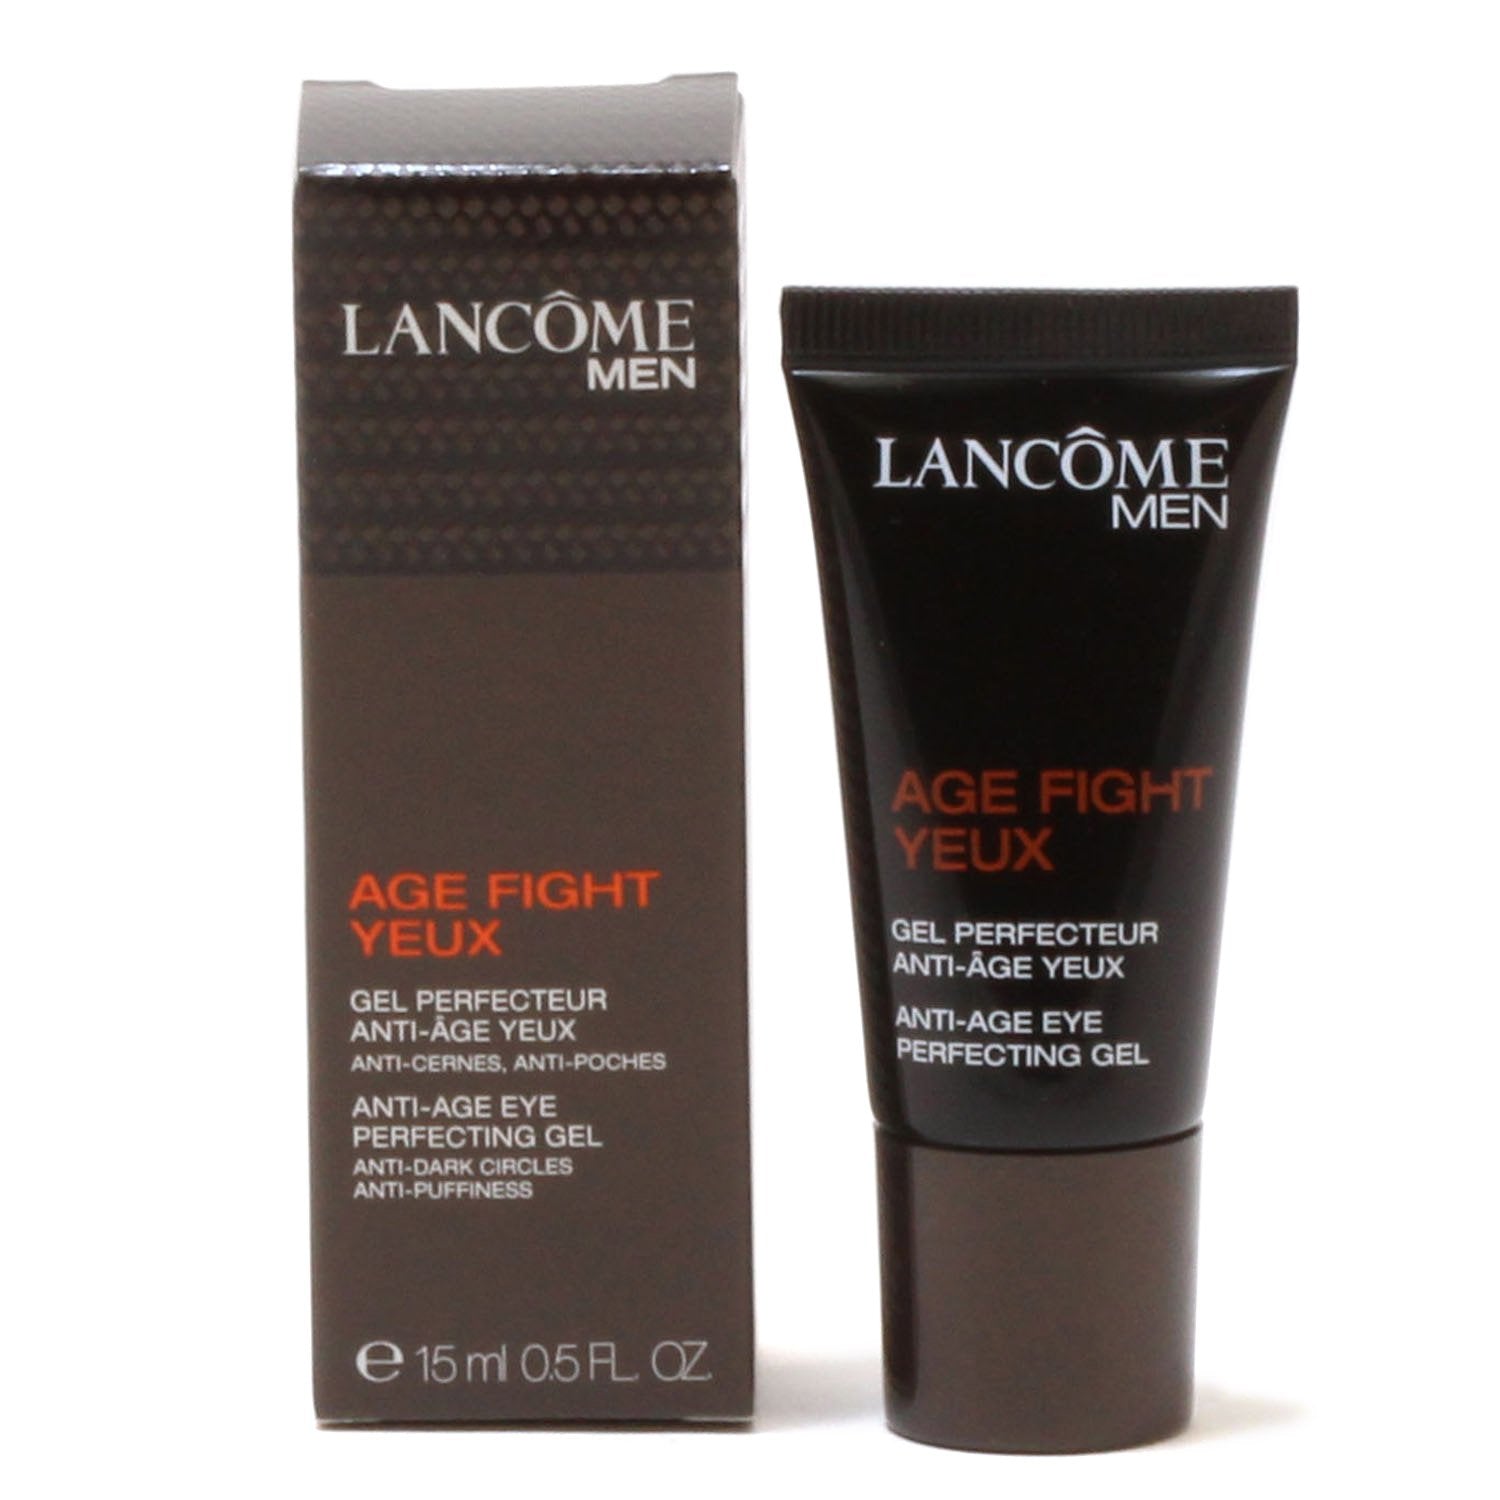 Skin Care - LANCOME AGE FIGHT YEUX ANTI-AGING EYE PERFECTING GEL FOR MEN, 0.5 OZ